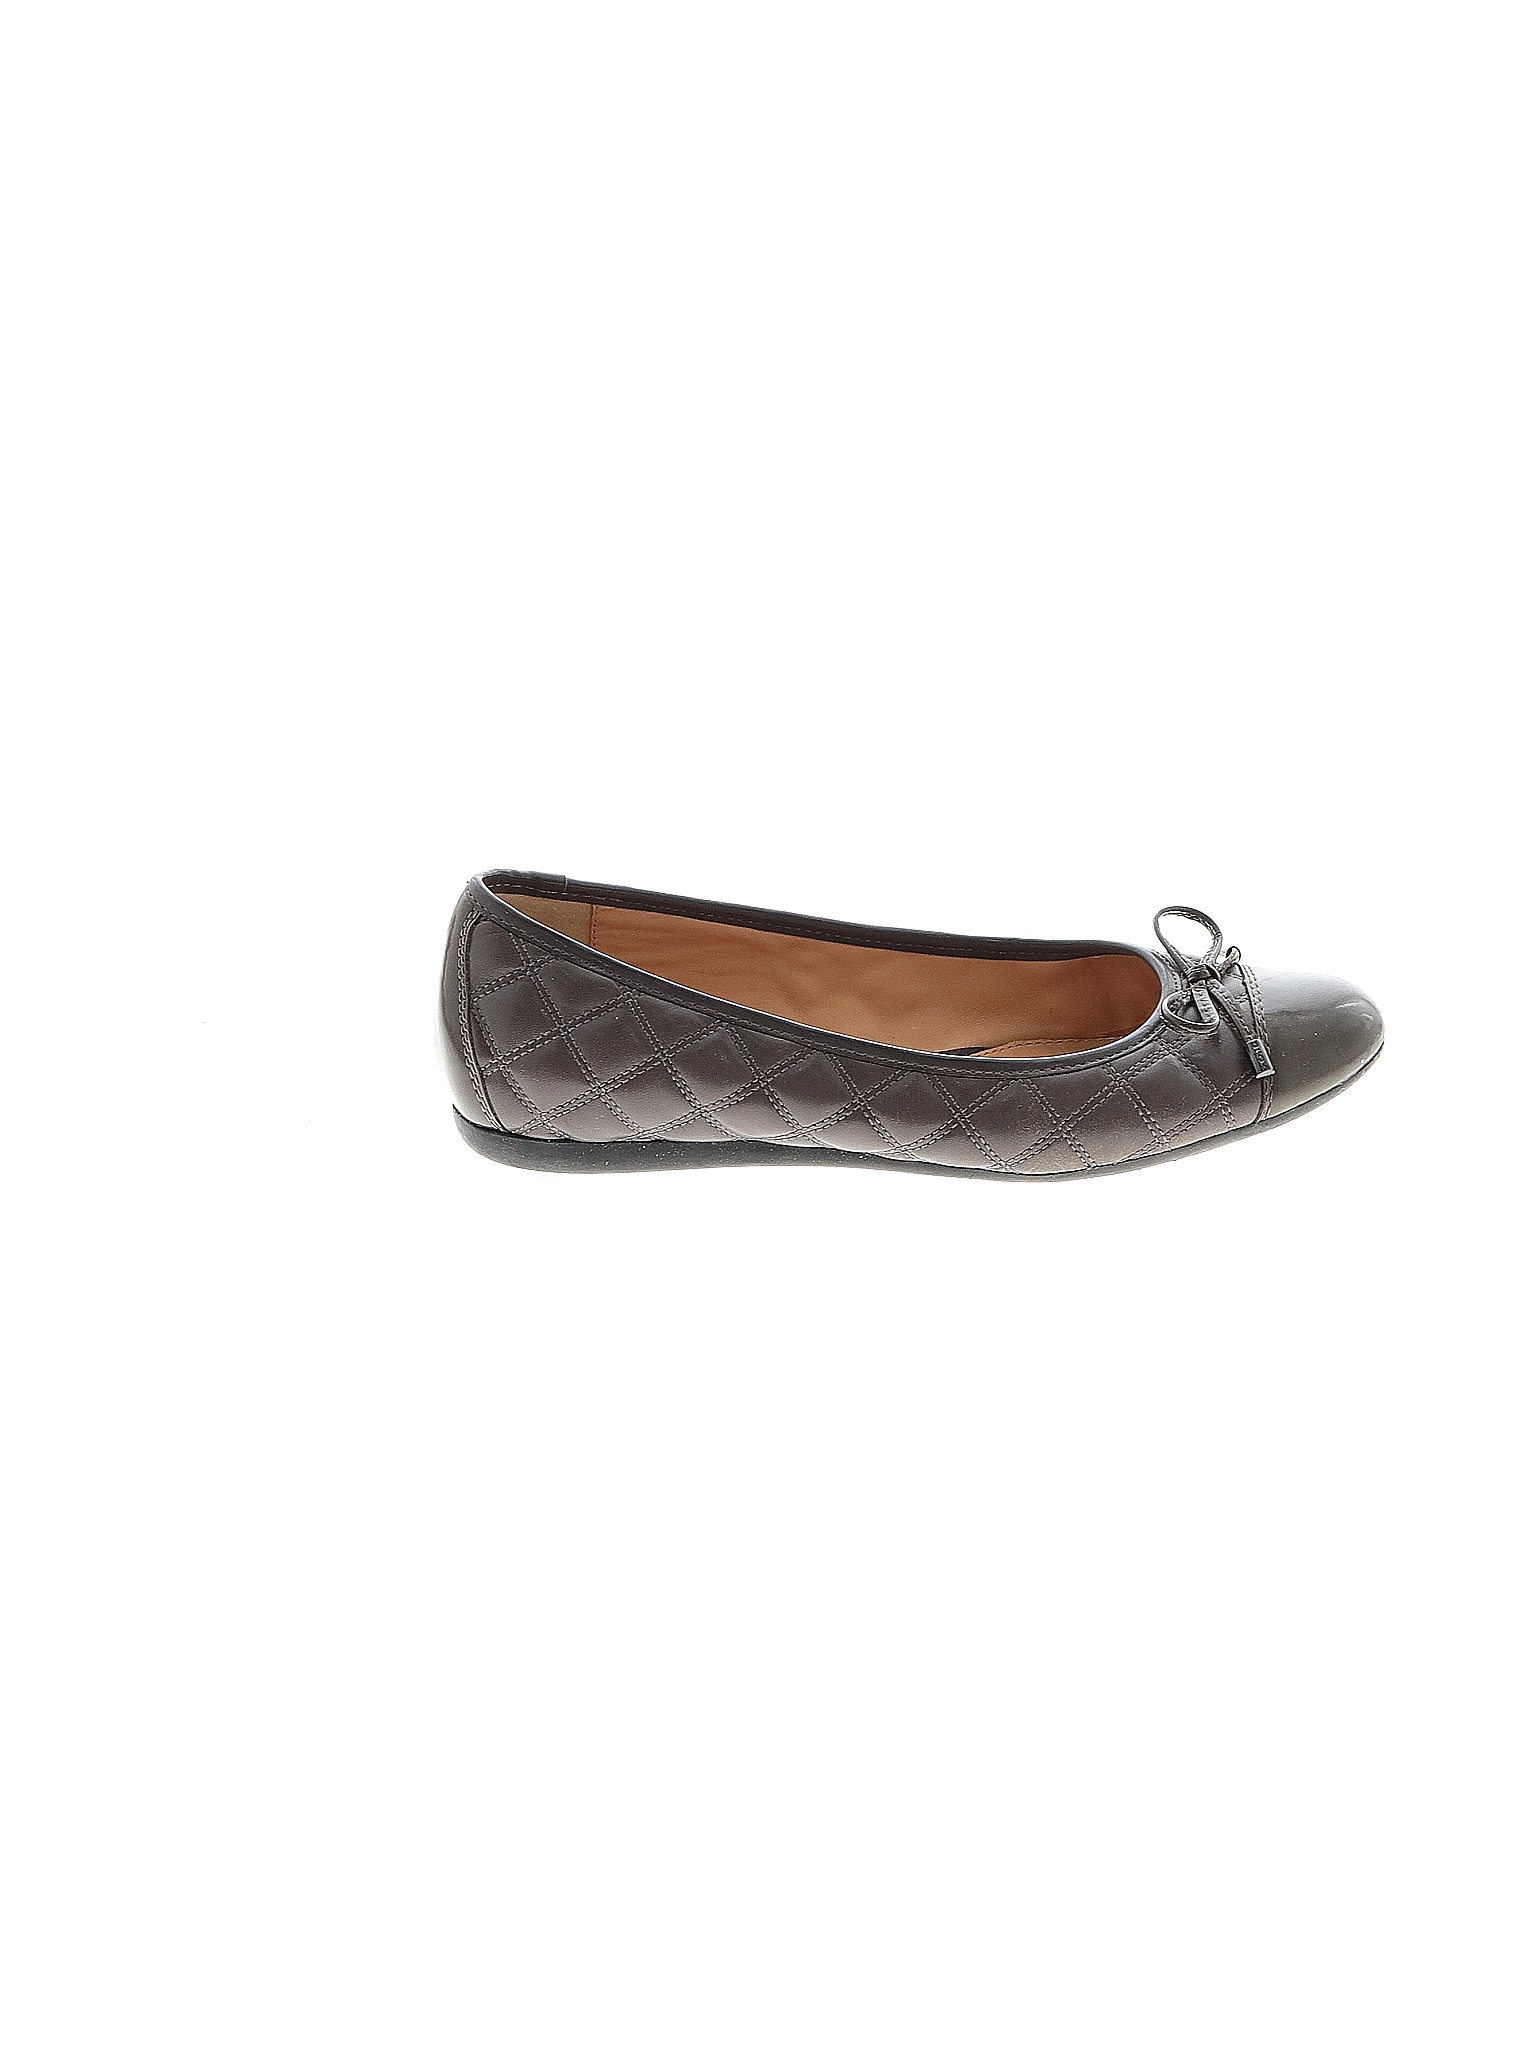 Geox Respira Women's Shoes On Sale To 90% Off Retail | thredUP